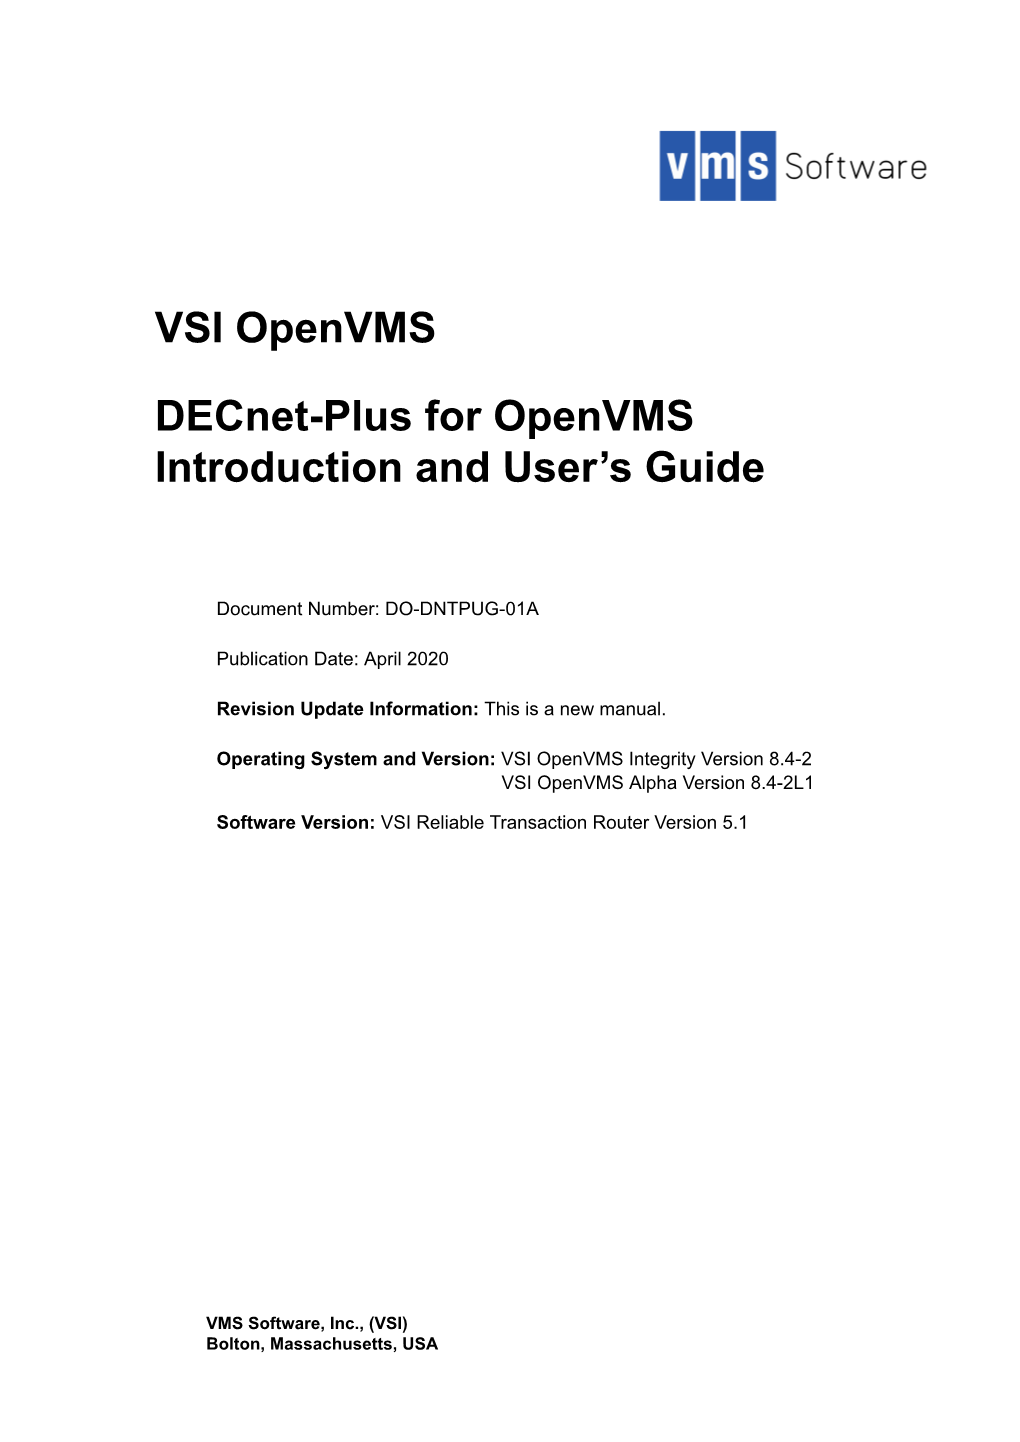 Decnet-Plus for Openvmsintroduction and User's